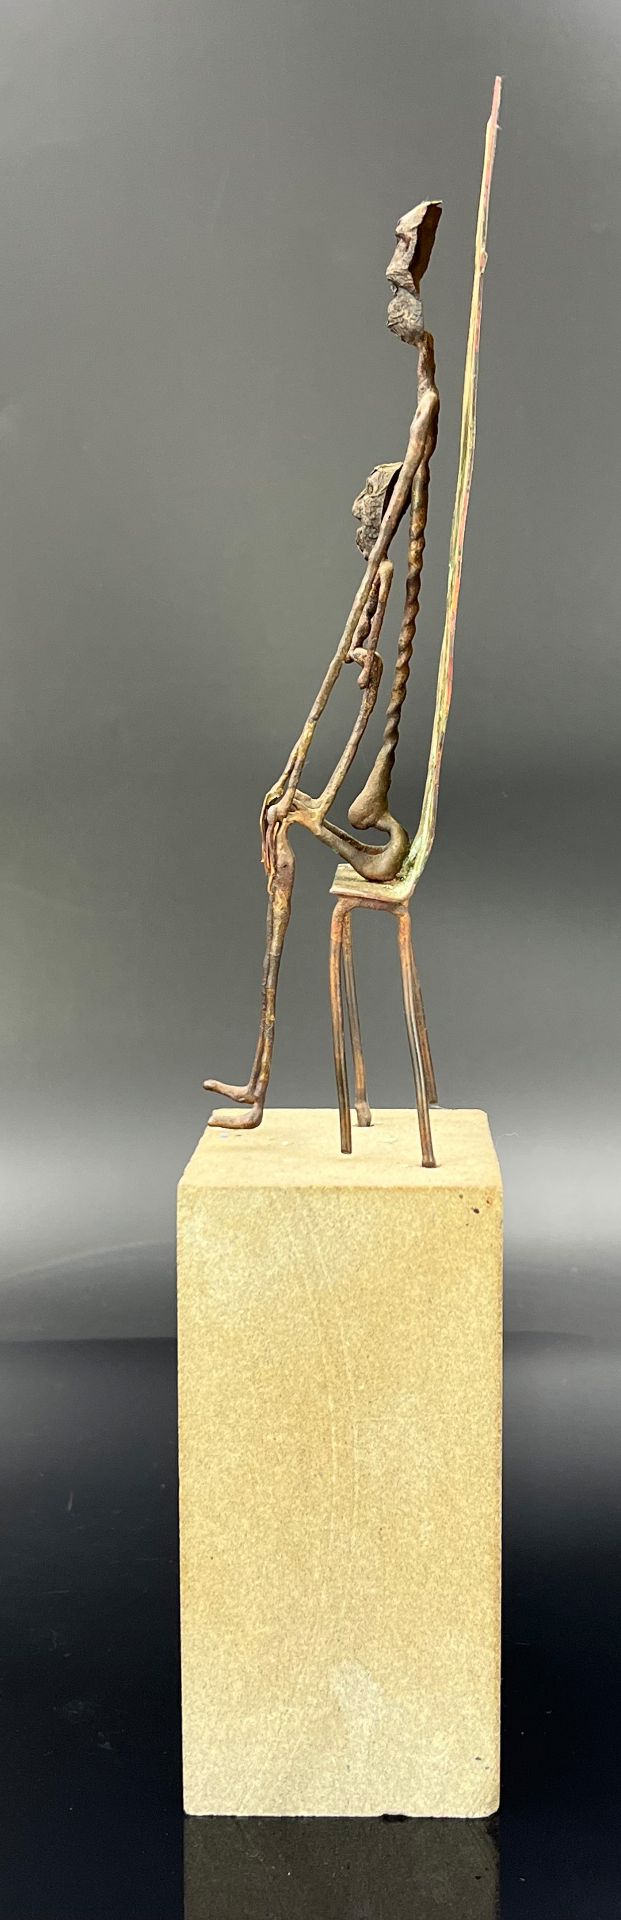 E.A. LANGENBERG (1953). Bronze. "Patriarch". - Image 3 of 9